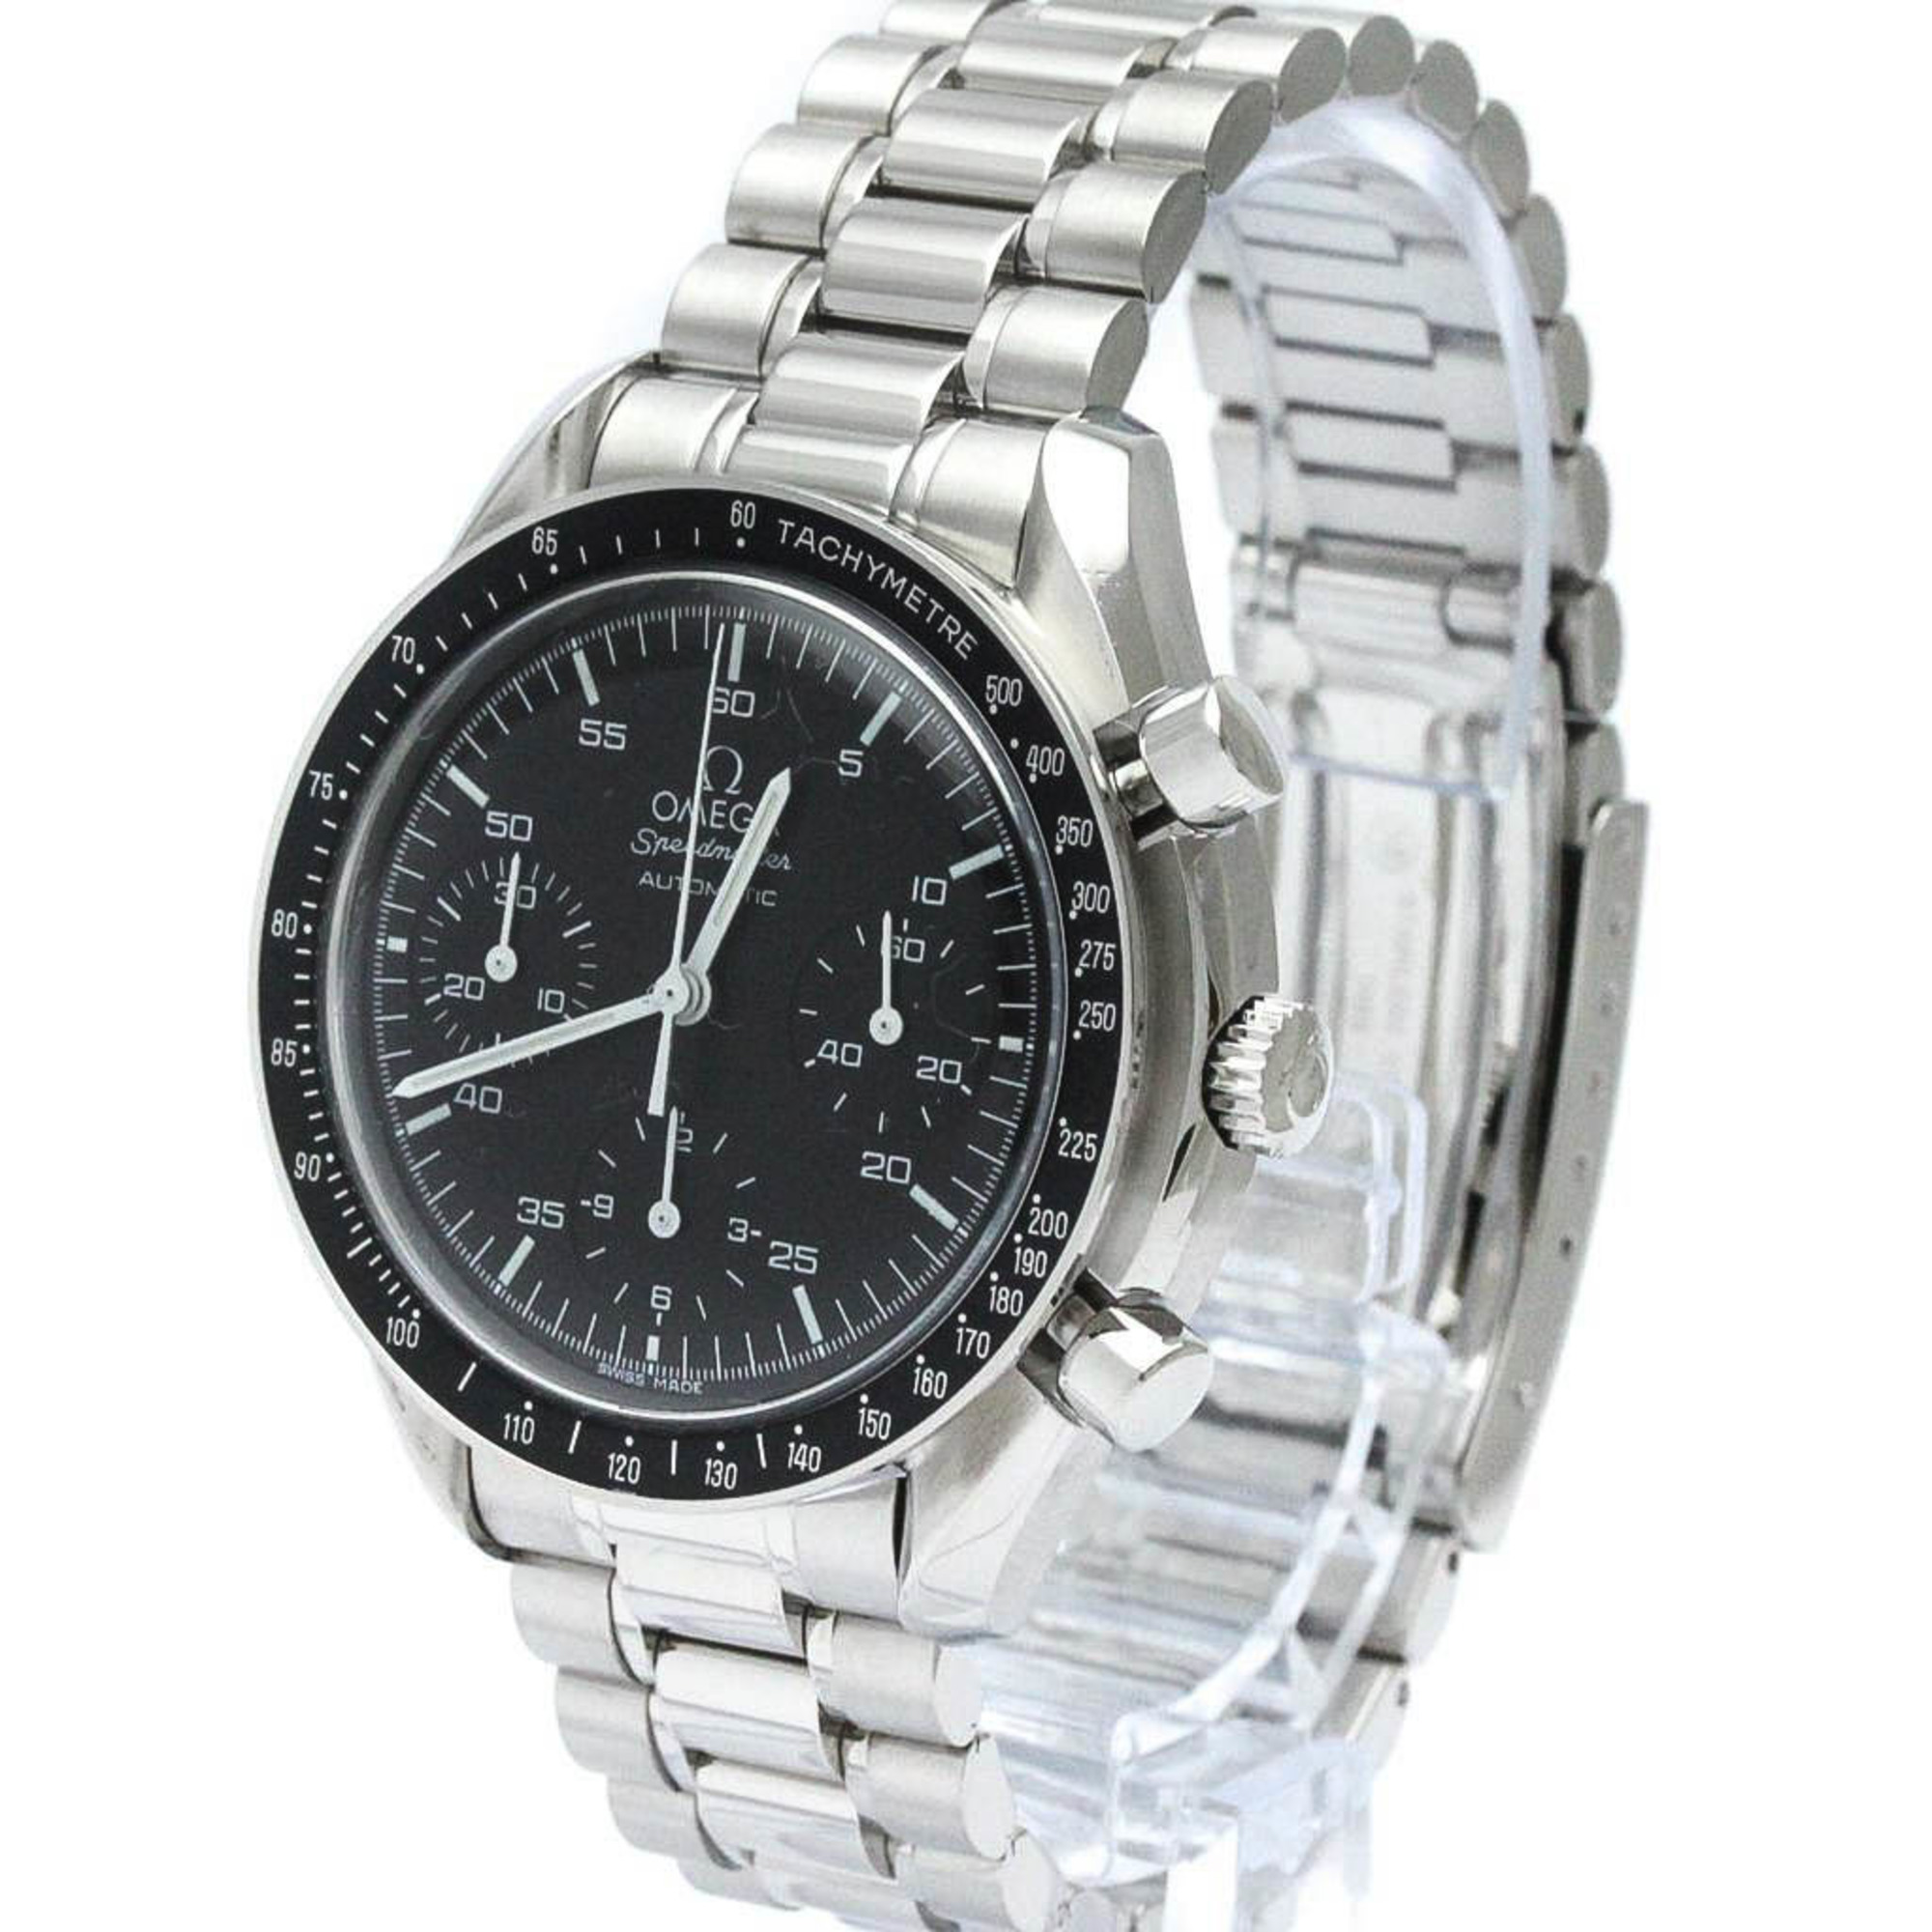 Polished OMEGA Speedmaster Automatic Steel Mens Watch 3510.50 BF566348